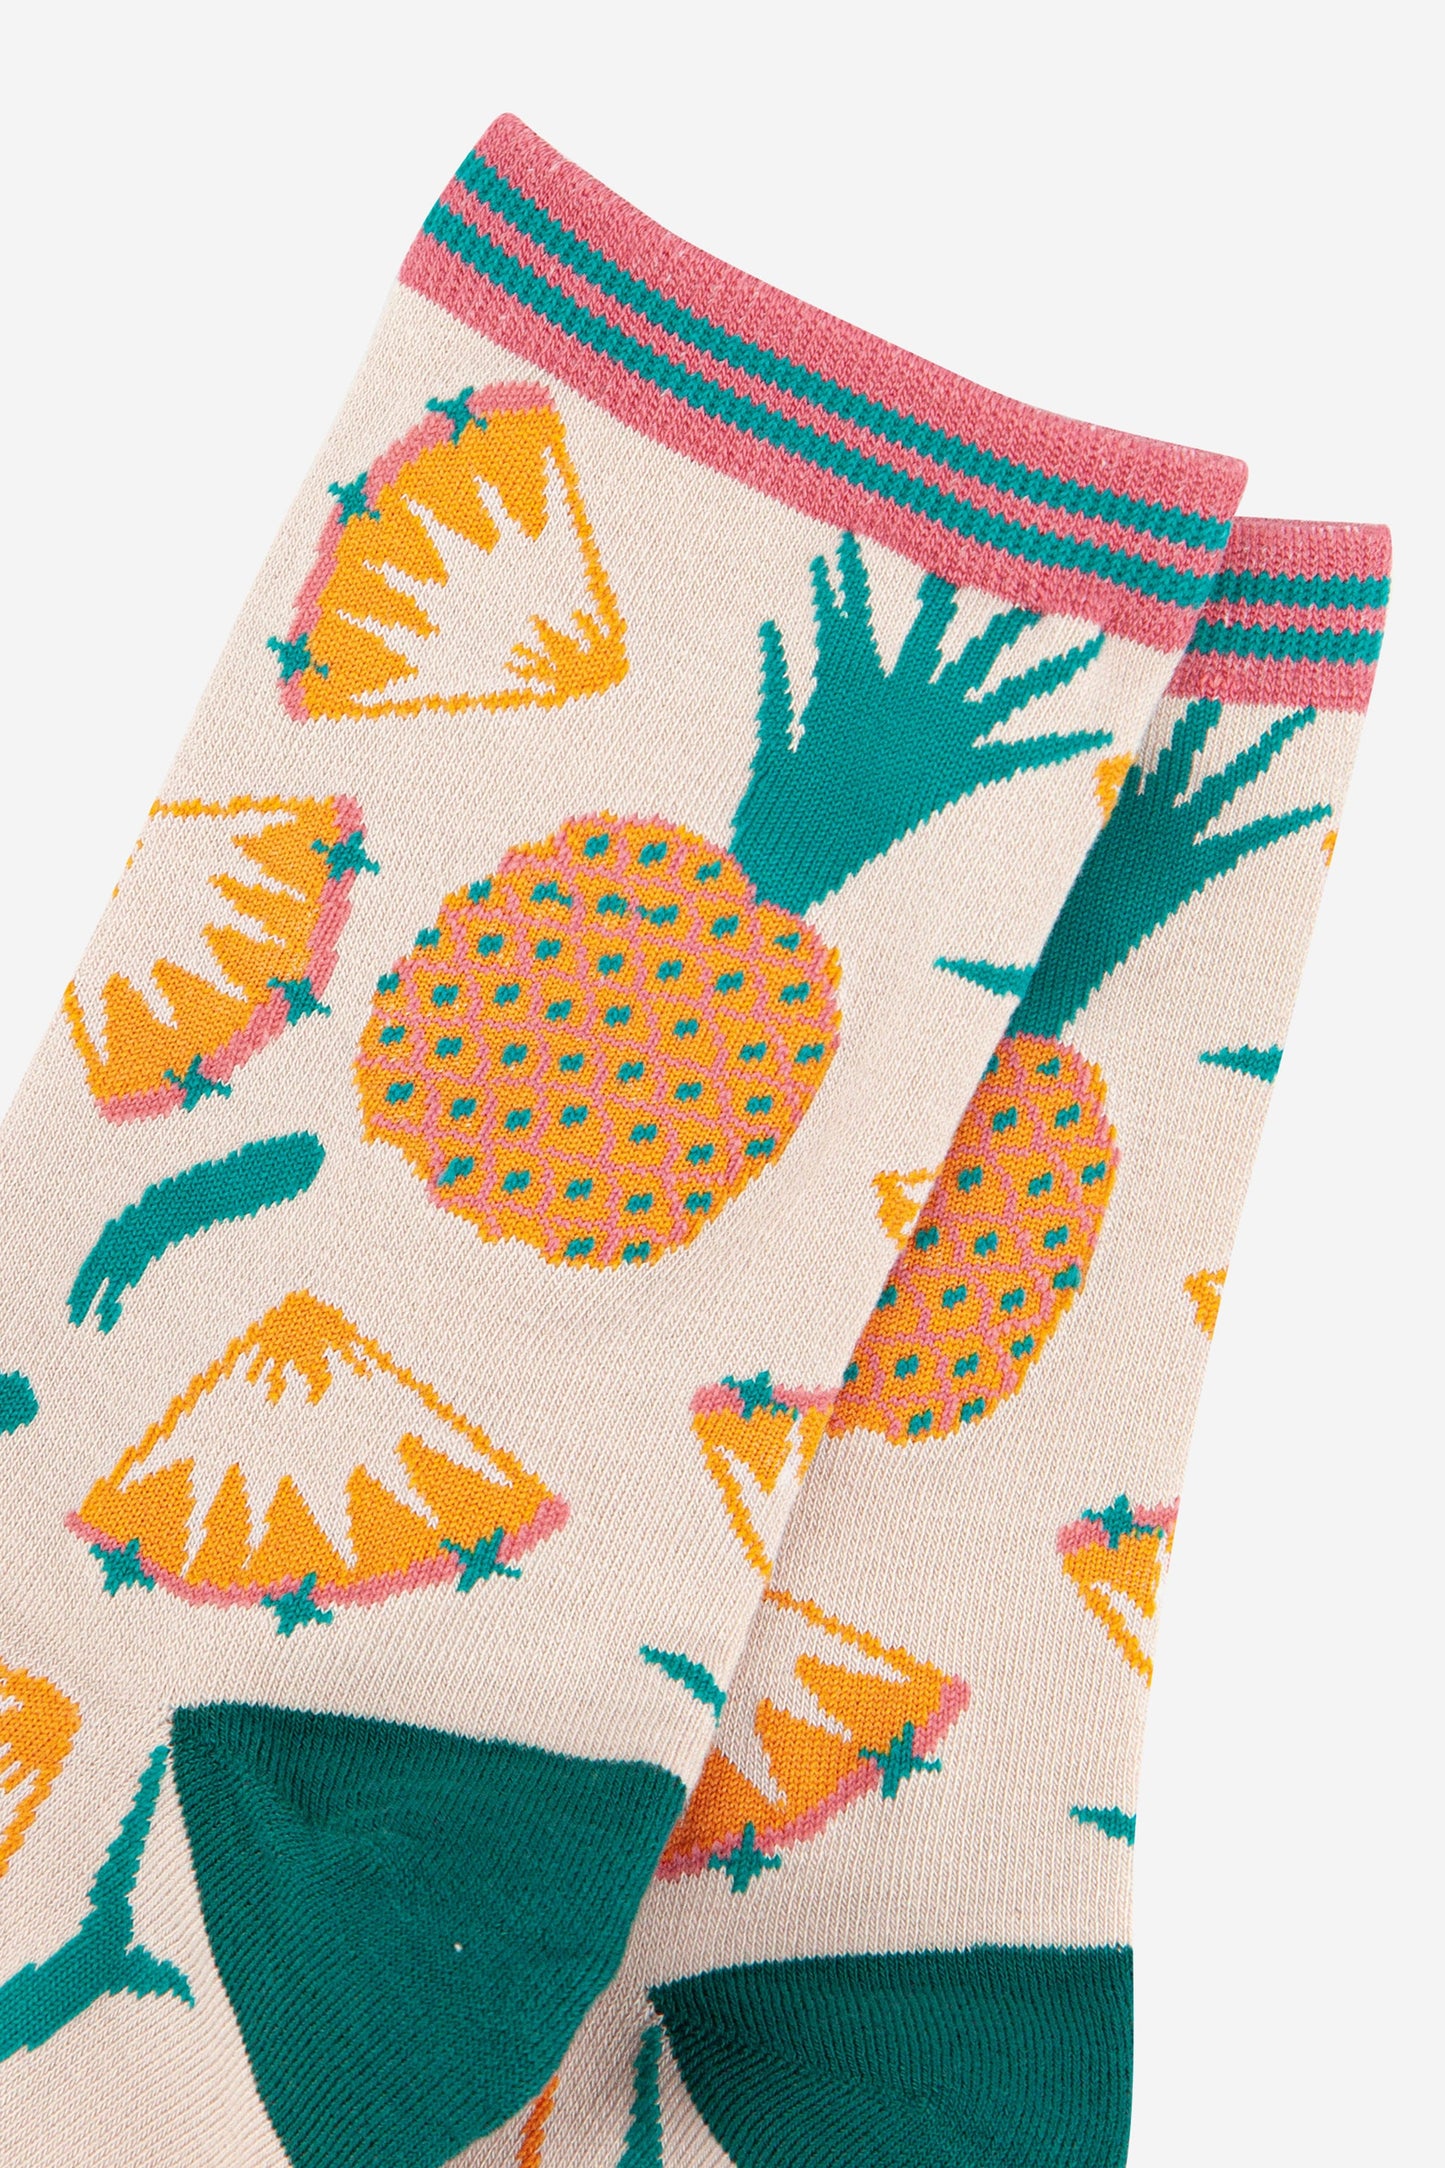 close up of the pineapple pattern on the socks, showing whole pineapples and pineapple slices